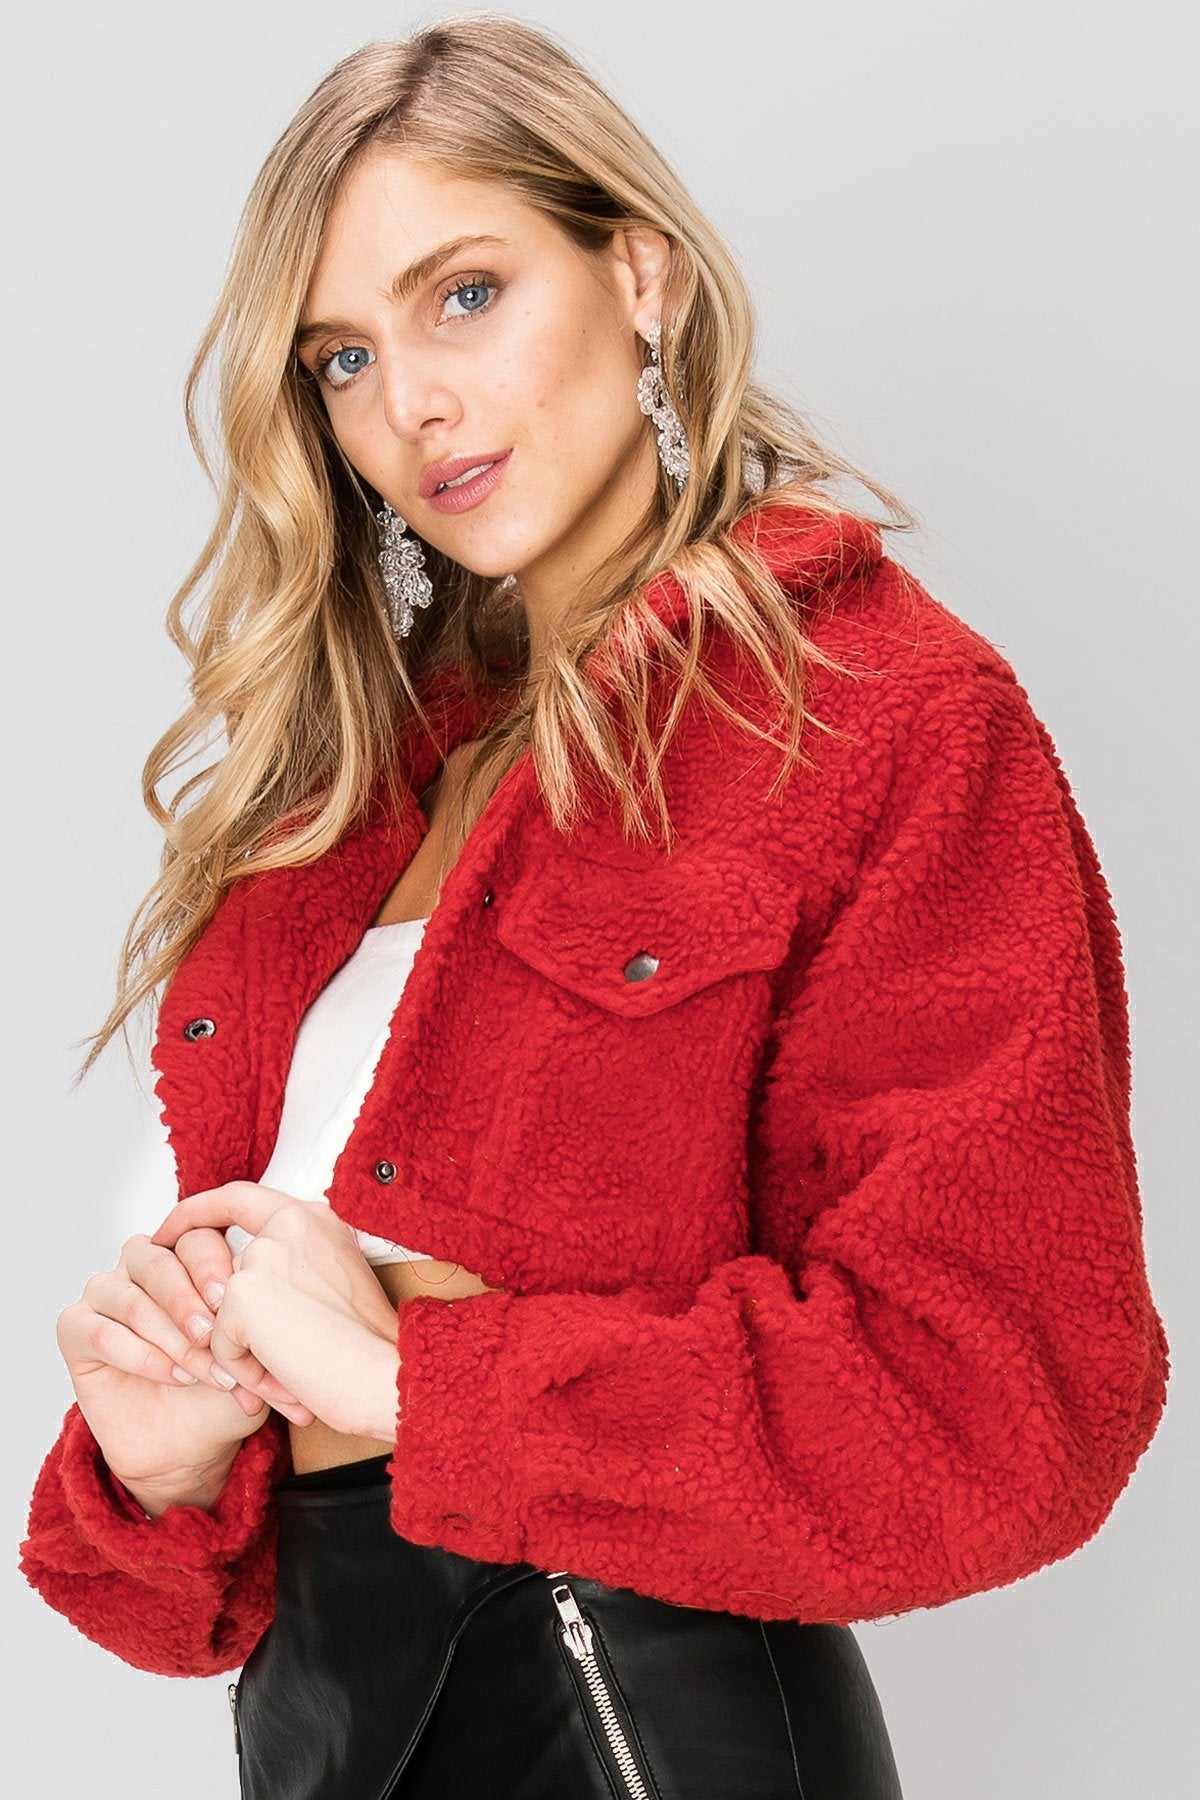 Mindy Cropped Teddy Jacket-2 Colors